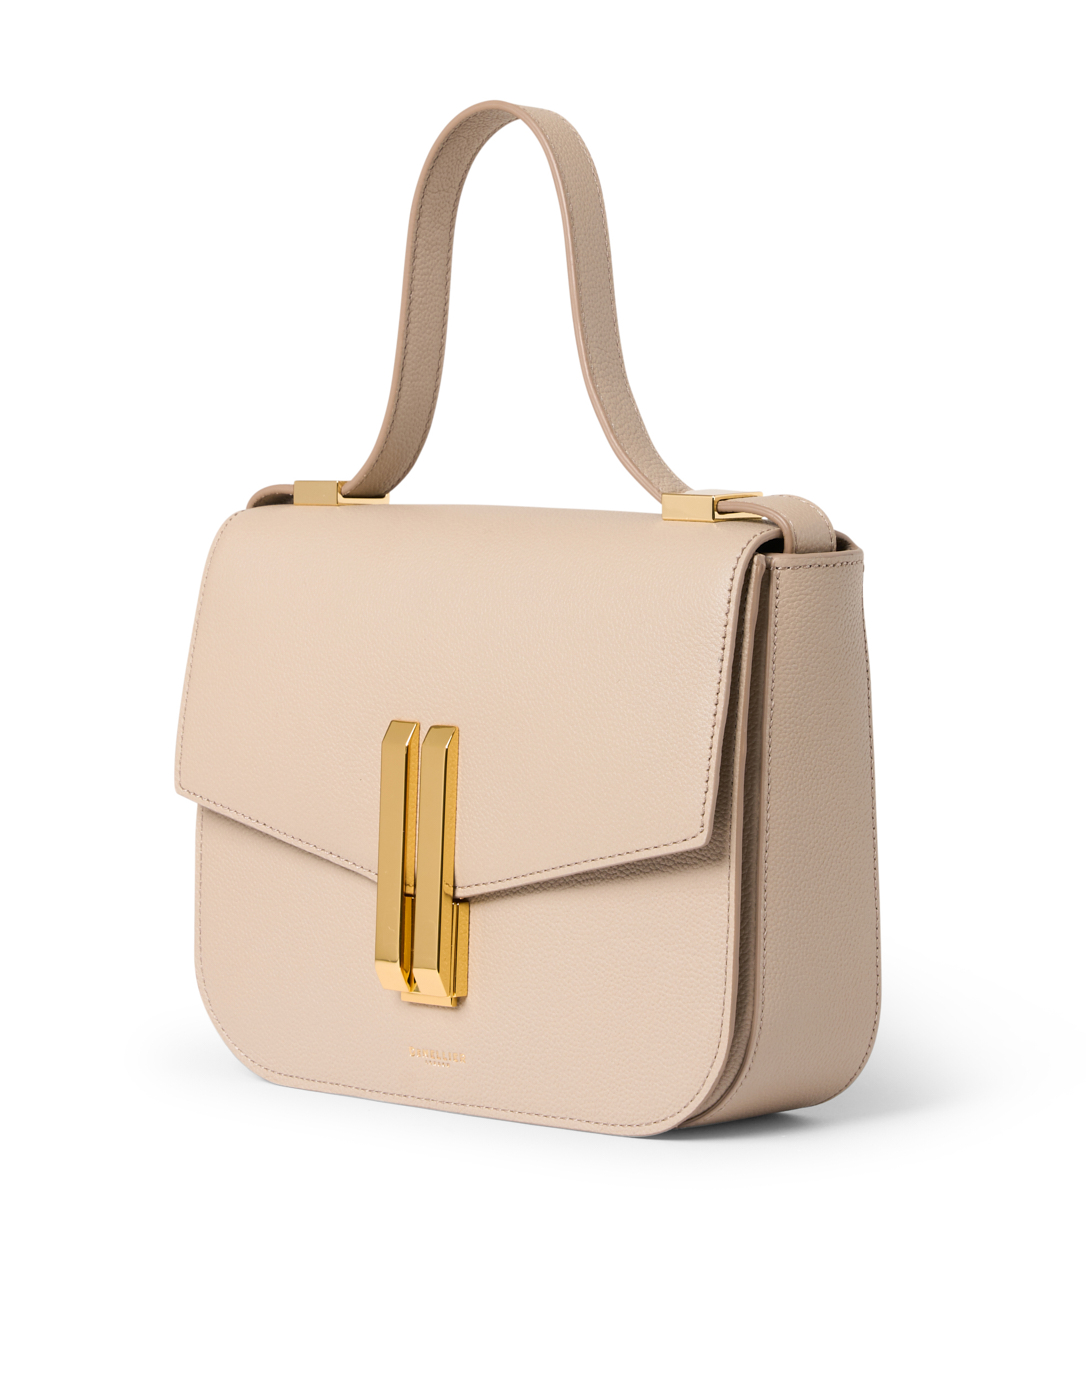 Vancouver Taupe Leather Crossbody Bag | DeMellier